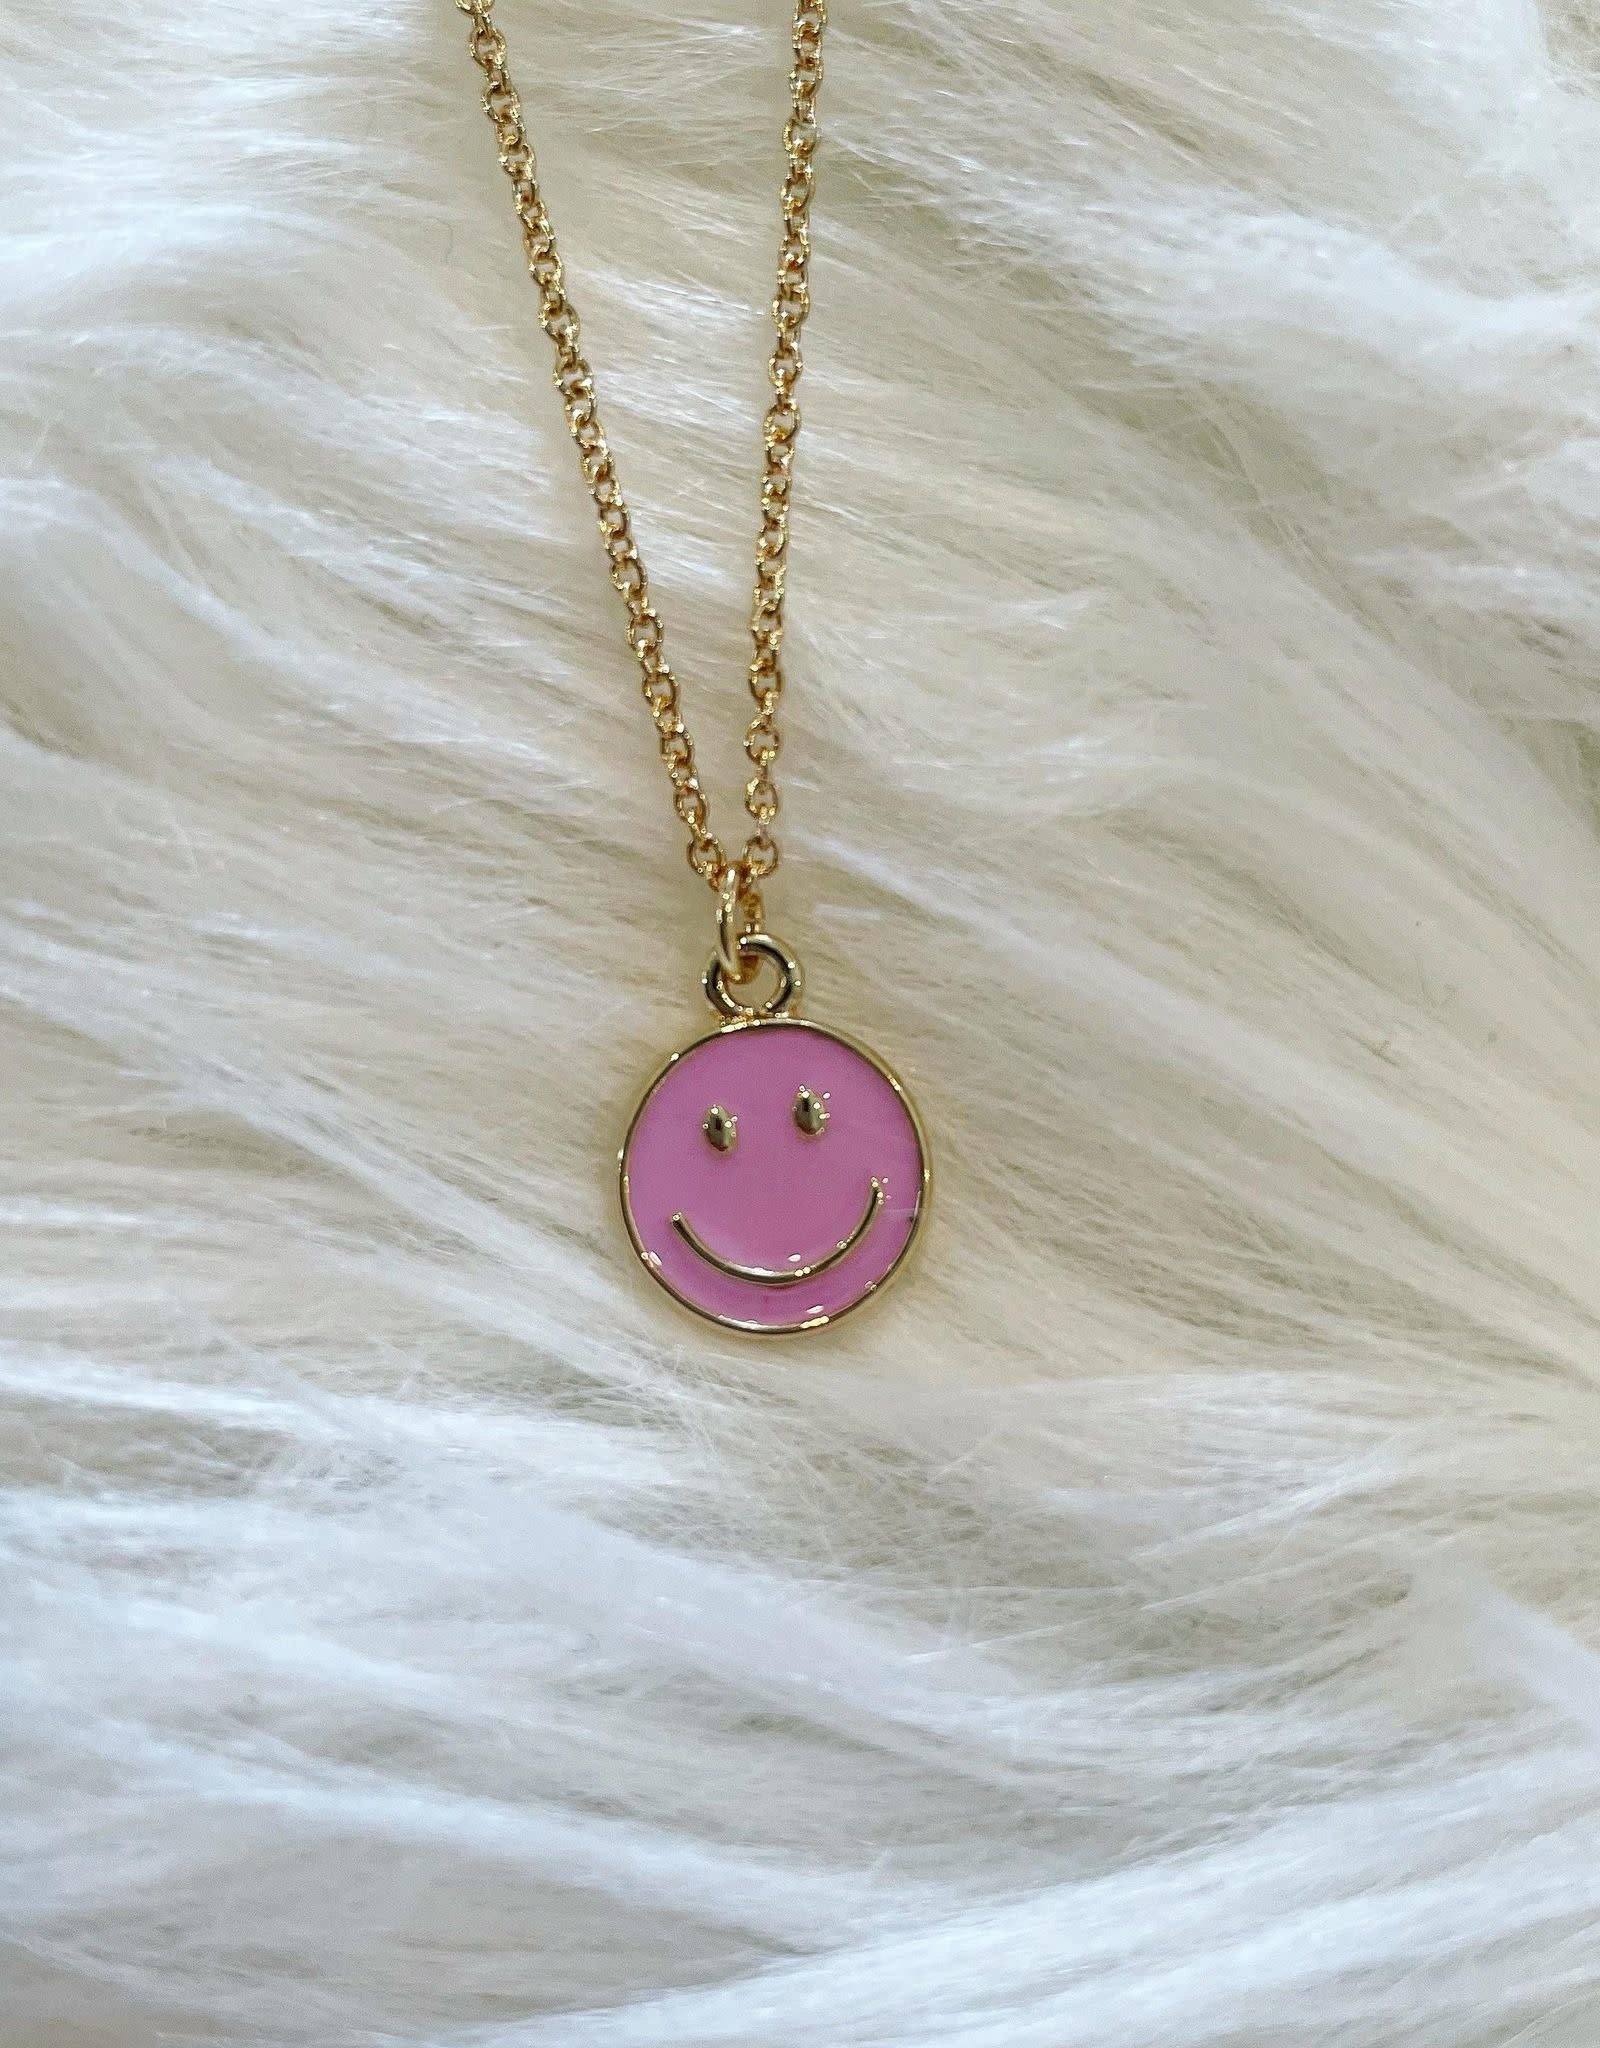 Smiley Face Necklace in Pink